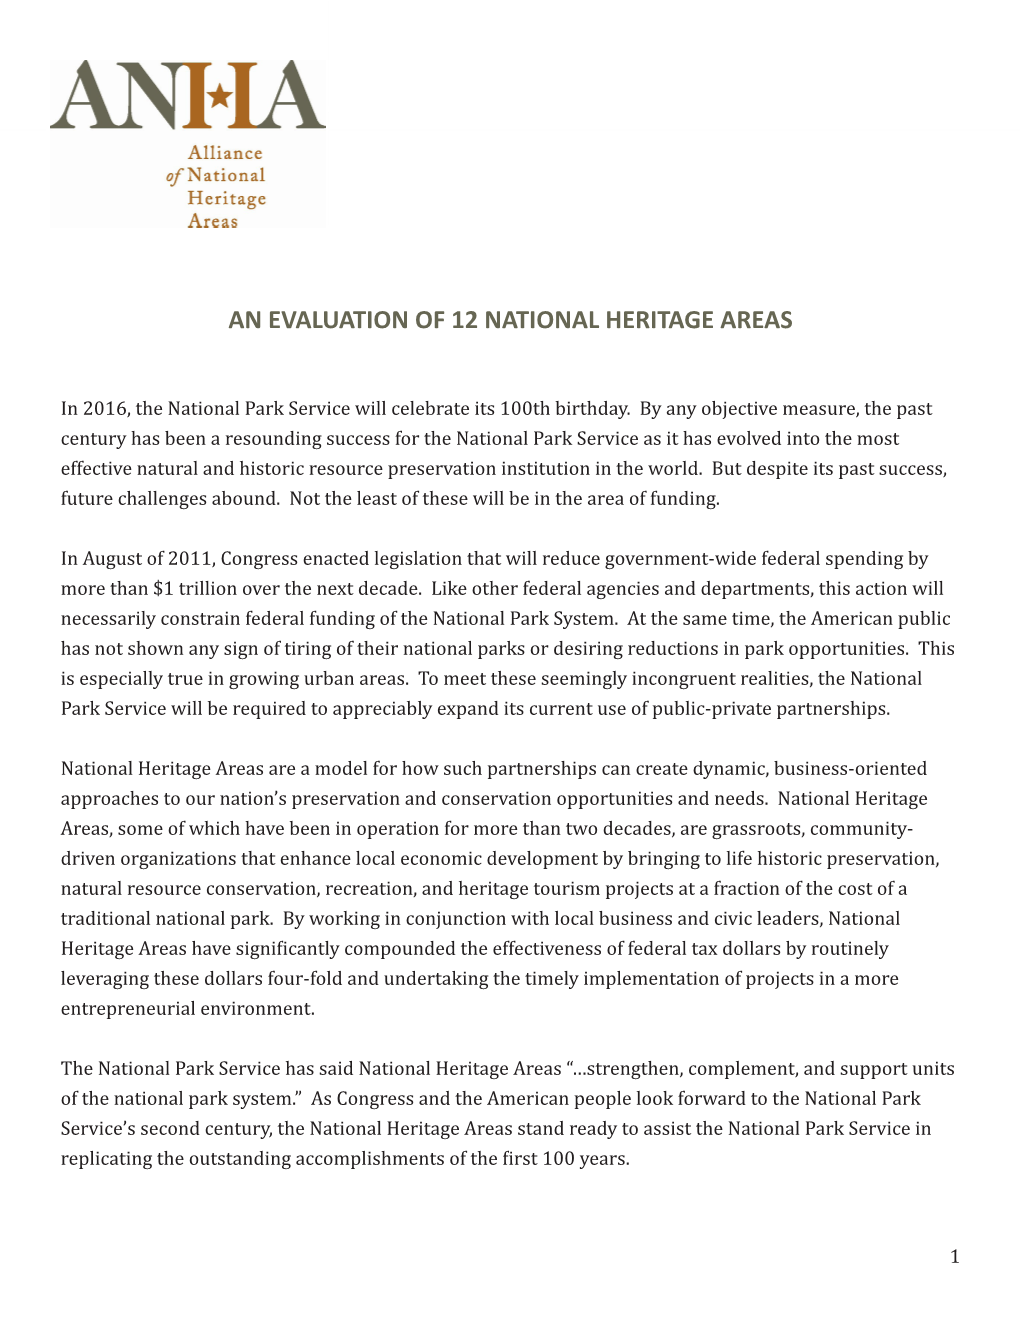 An Evaluation of 12 National Heritage Areas